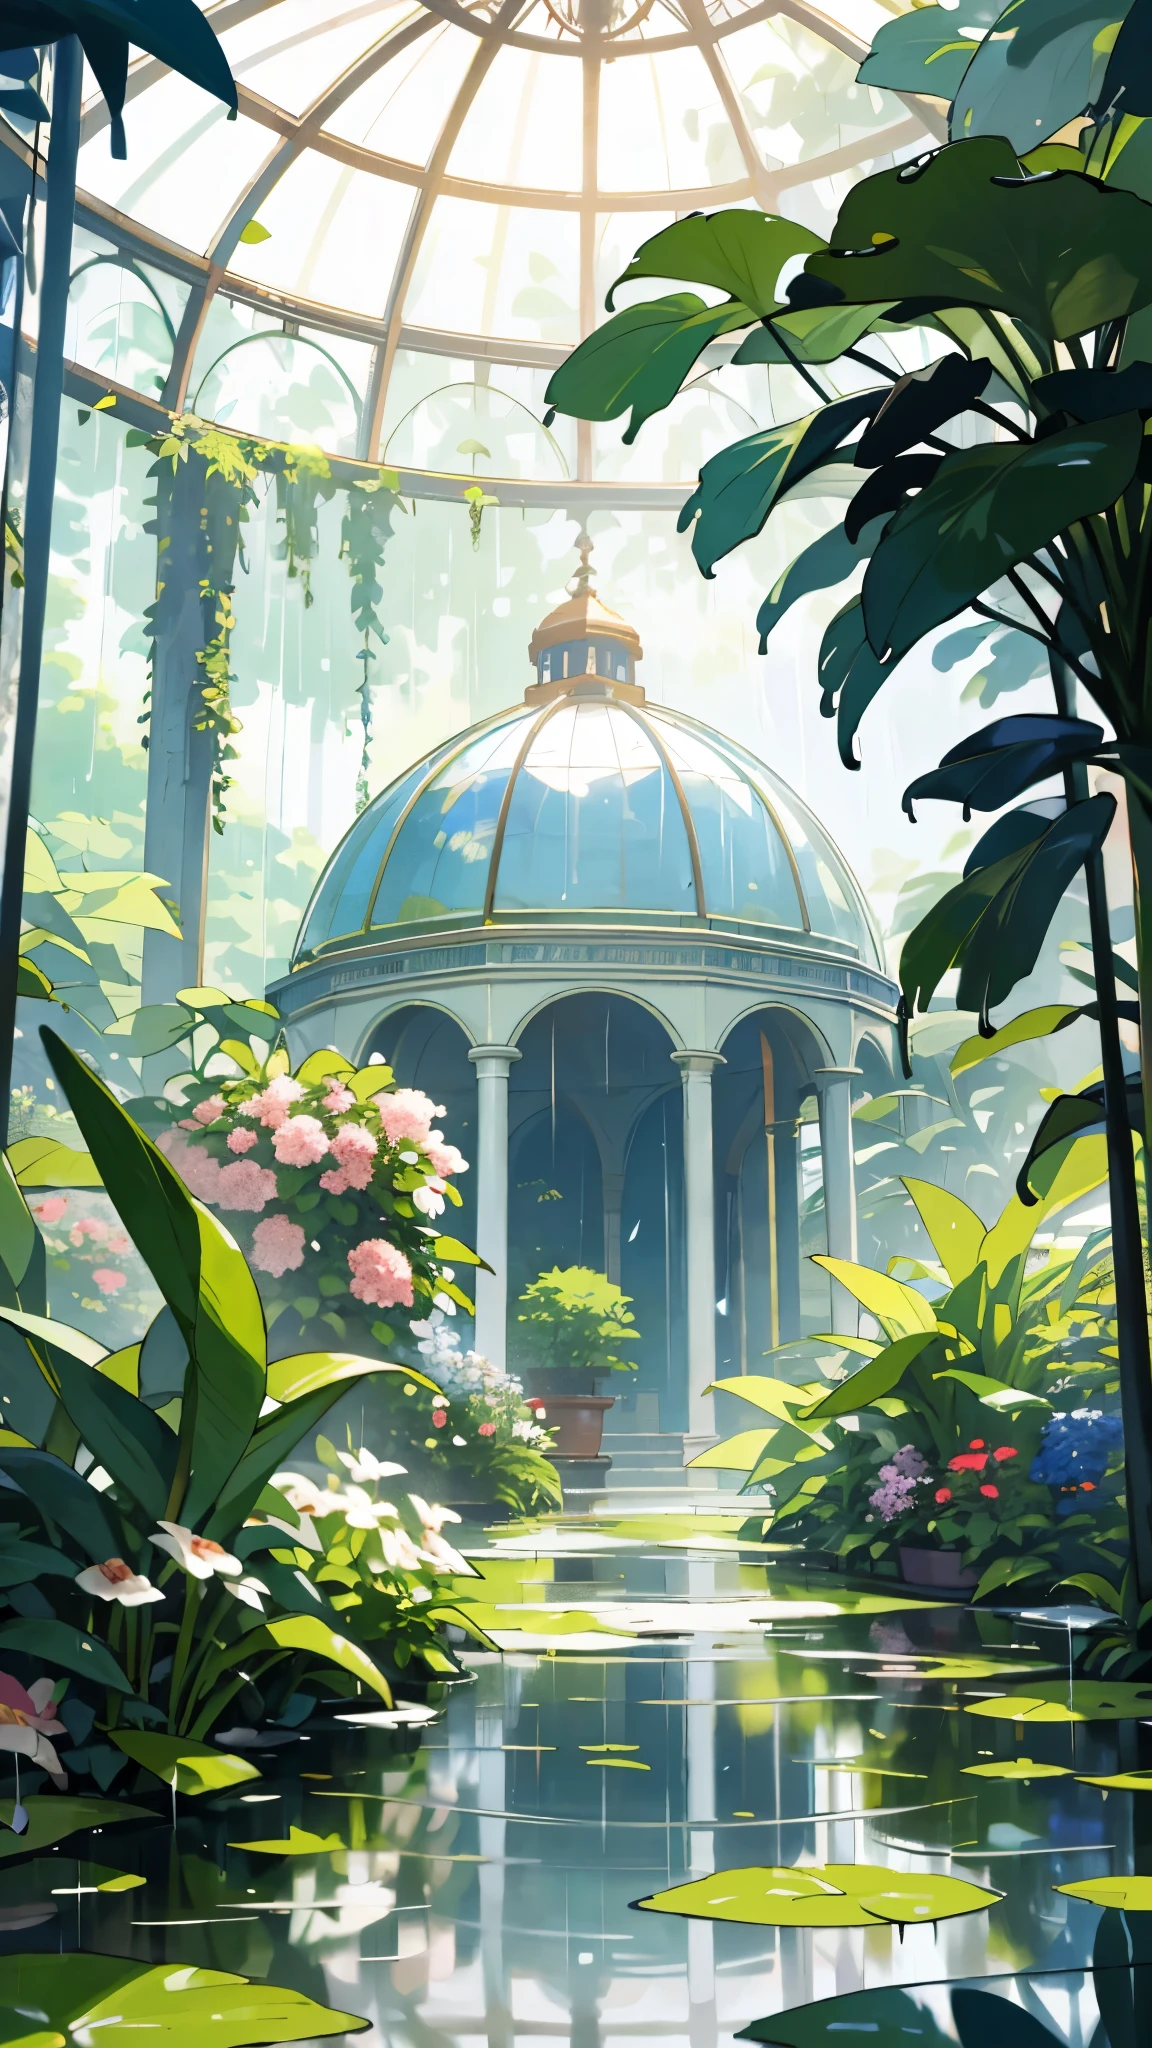 (top quality, masterpiece, ultra-realistic), rainy day, raining, wet ground, puddle, indoor botanical garden, dome, lots of flowers, dense mass plants, the background landscape is a garden with petals and puffs flying around. --v6